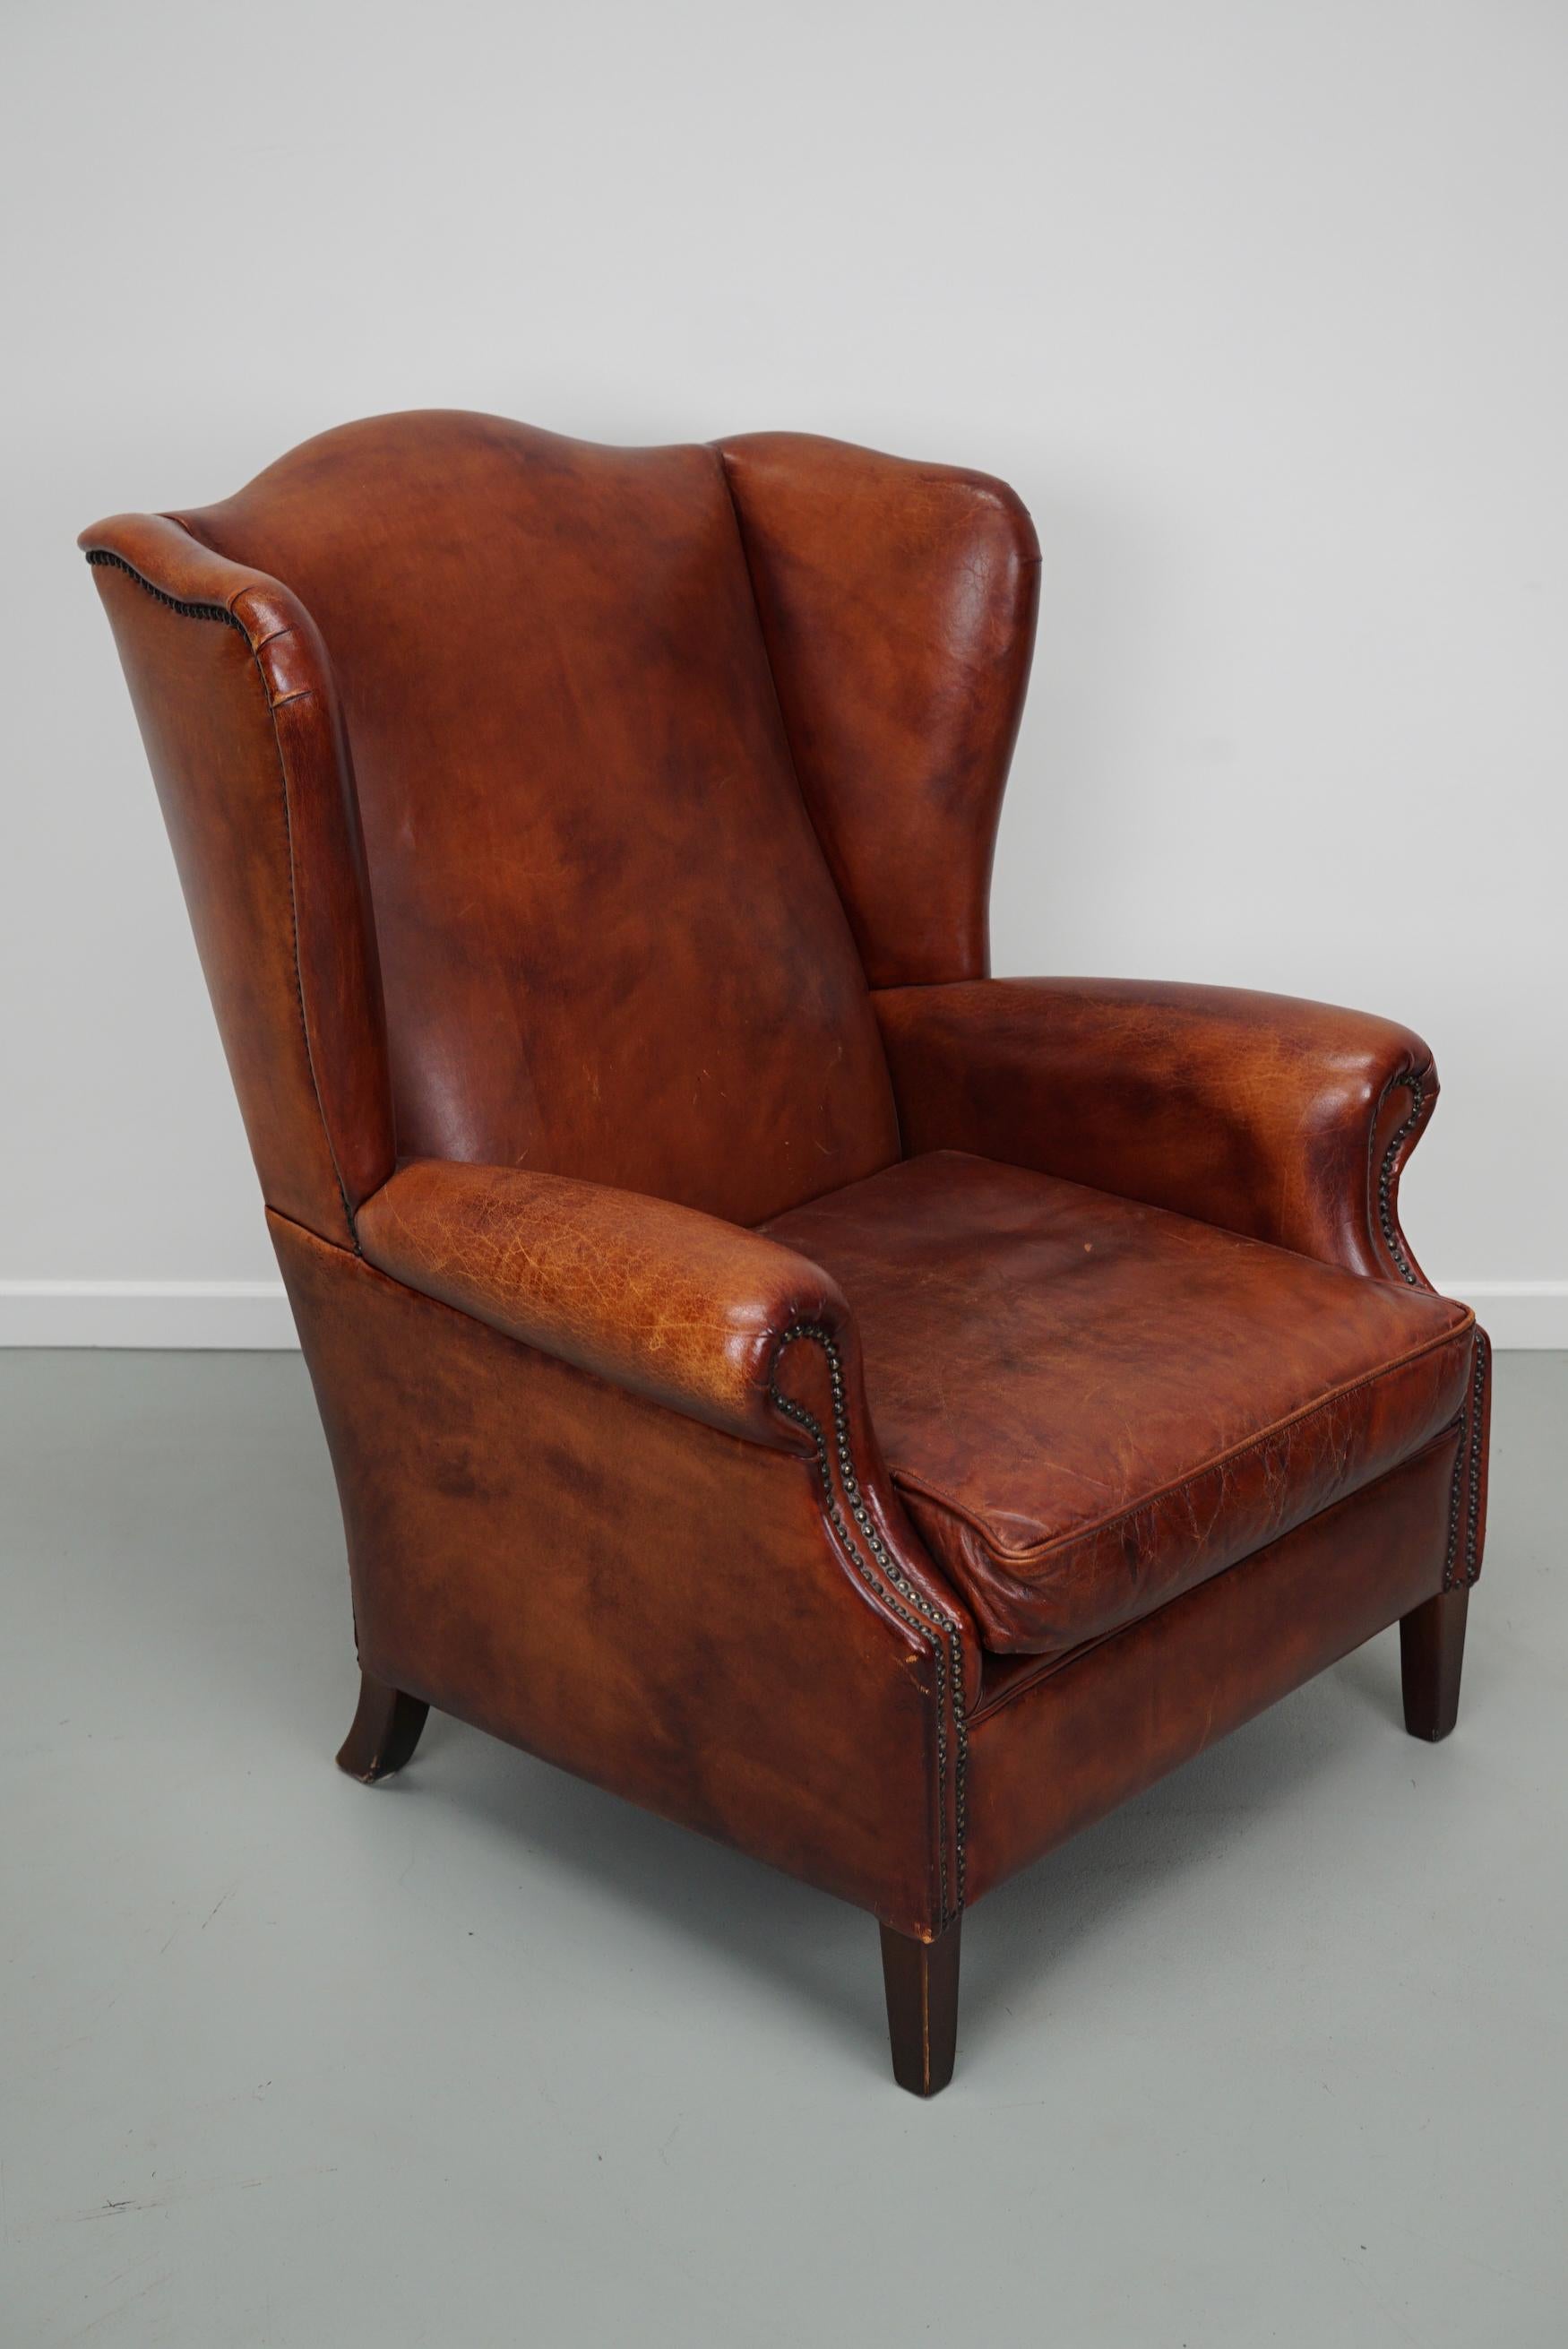 Industrial  Vintage Dutch Cognac Colored Wingback Leather Club Chair For Sale